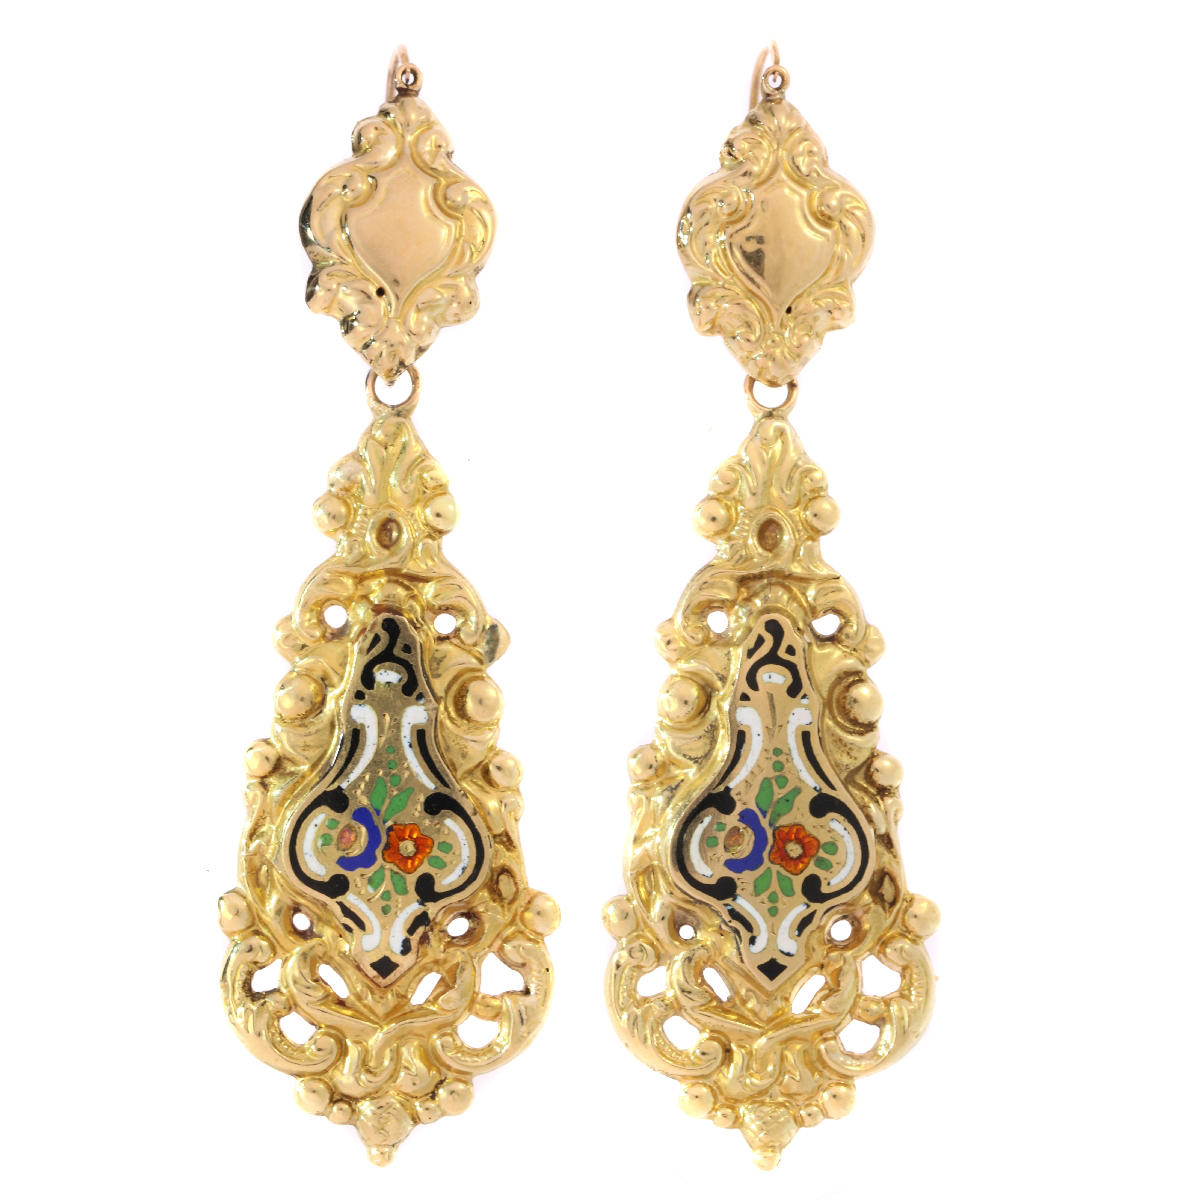 Antique Victorian gold dangle earrings with enamel